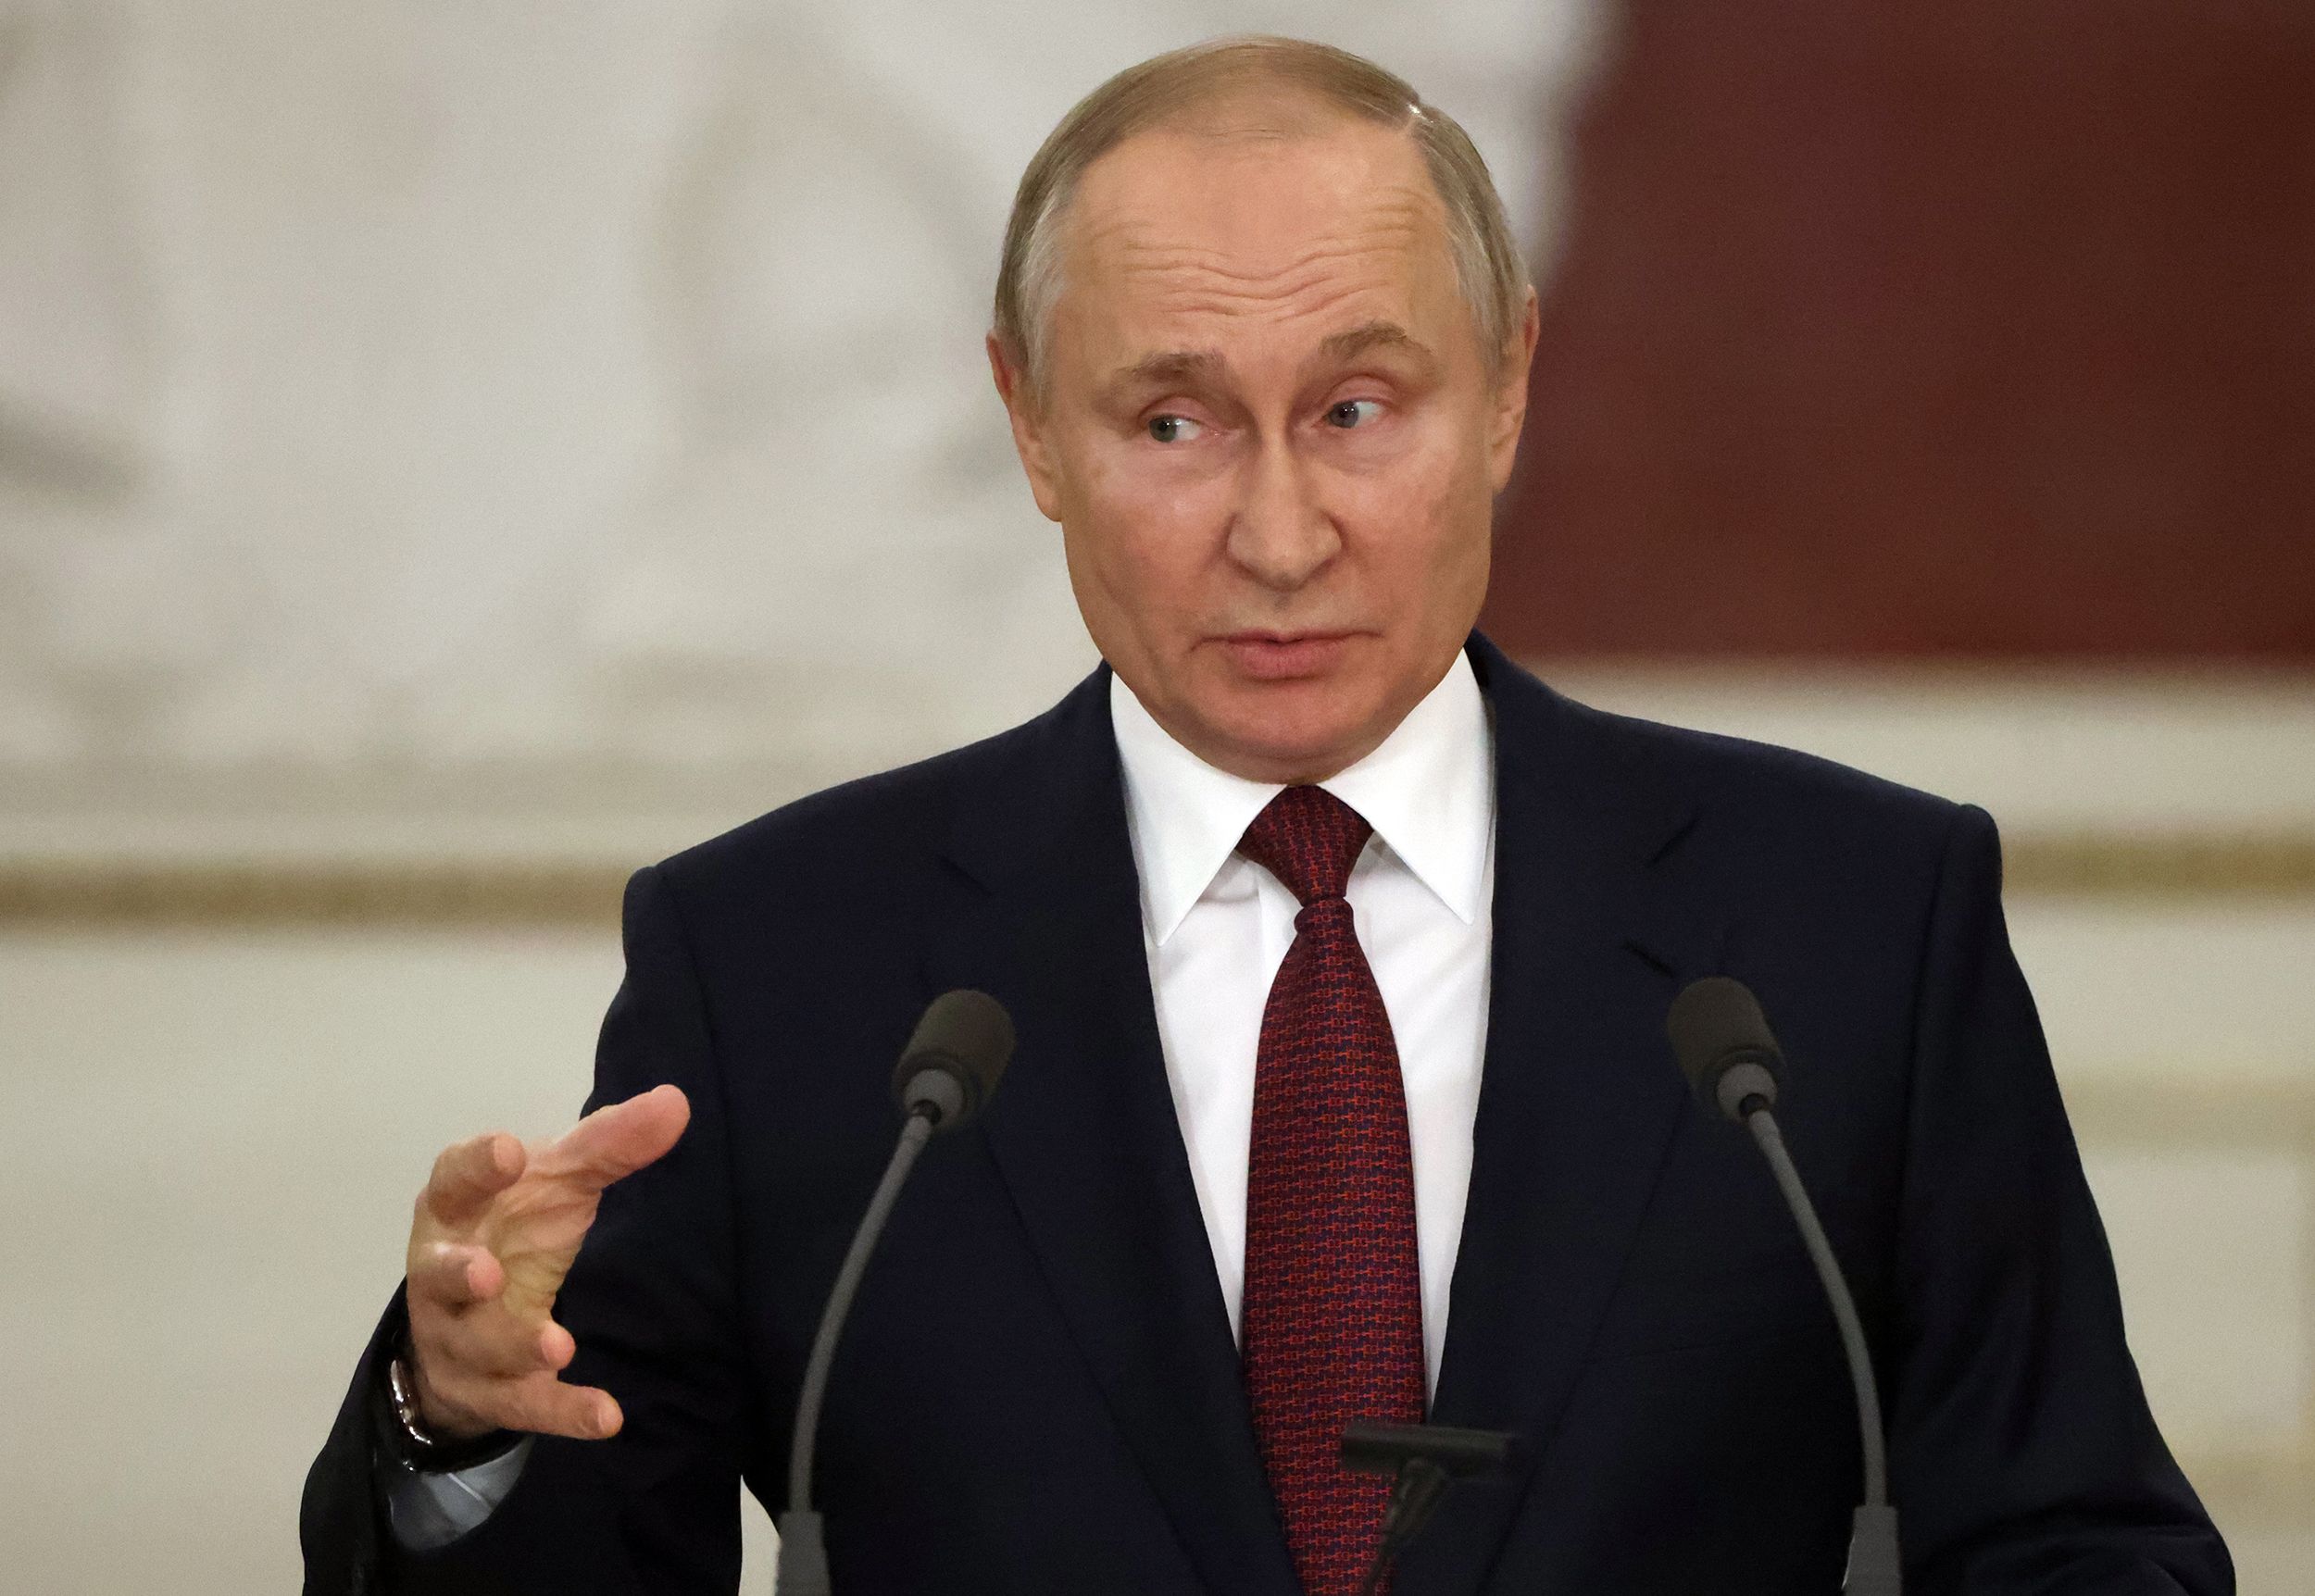 Putin Takes a Swipe at the U.S., Comments on Israel-Hamas Ceasefire